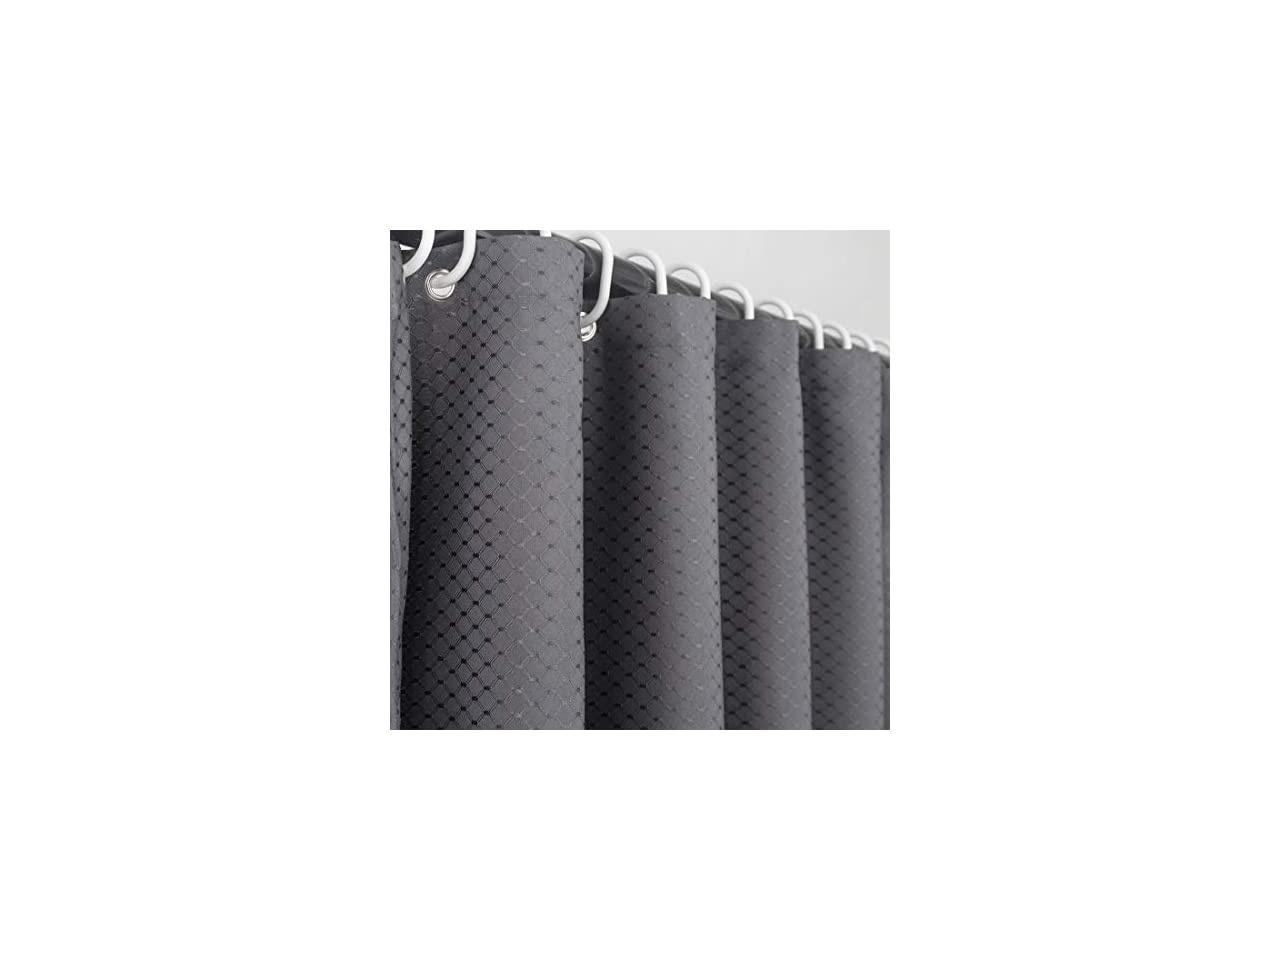 Extra Long Fabric Shower Curtains Or Liner 70 X 86 Heavy Weight Fabric Bathroom Shower Curtains 86 Inch Long For Home And Hotel Decor Dark Gray Newegg Com